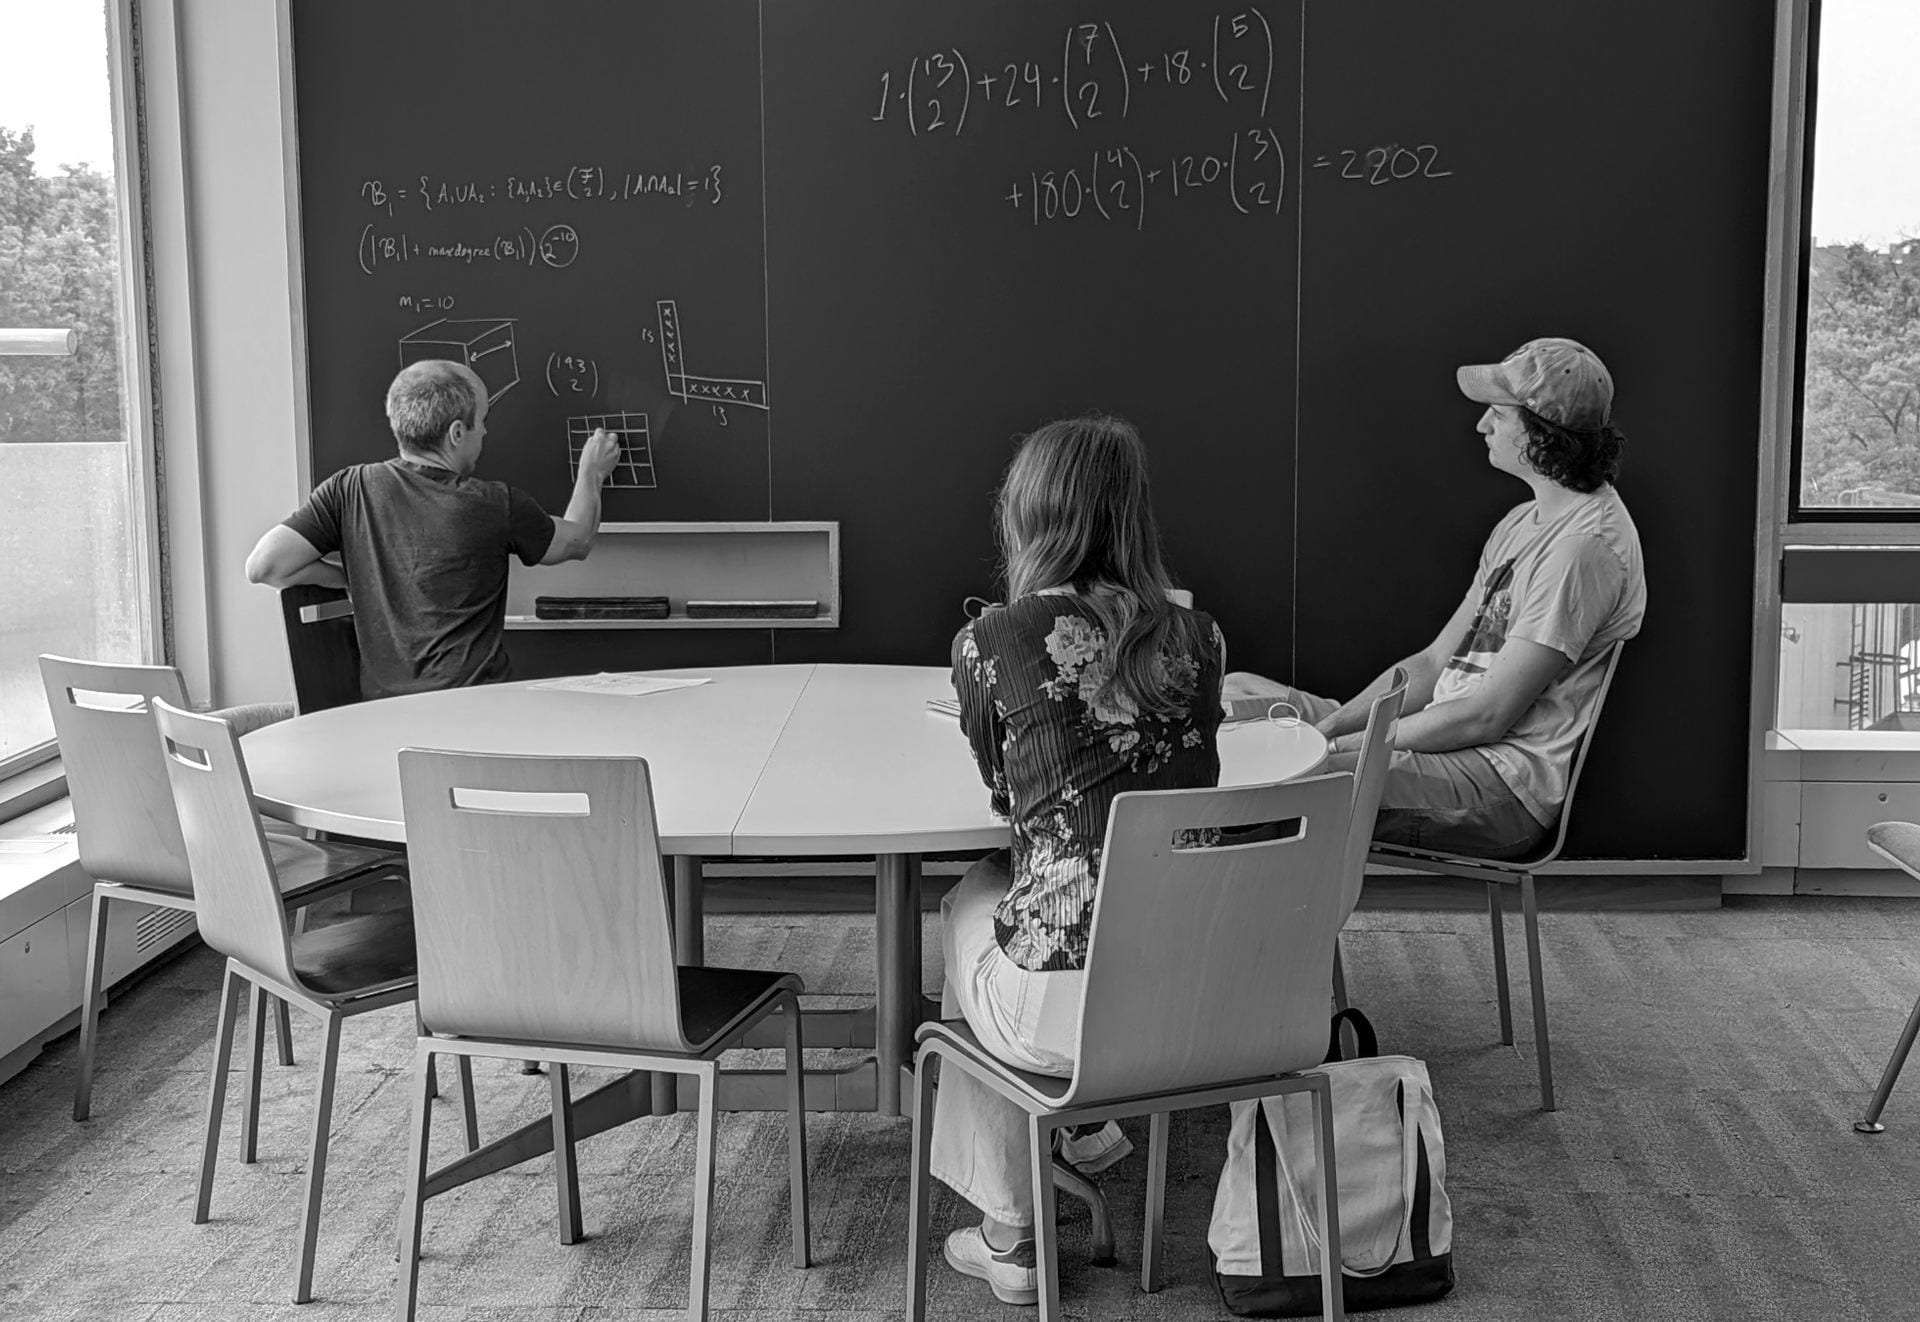 A black and white photo of a math instructor writing formulae on a blackboard in front of two students sitting at a round table.